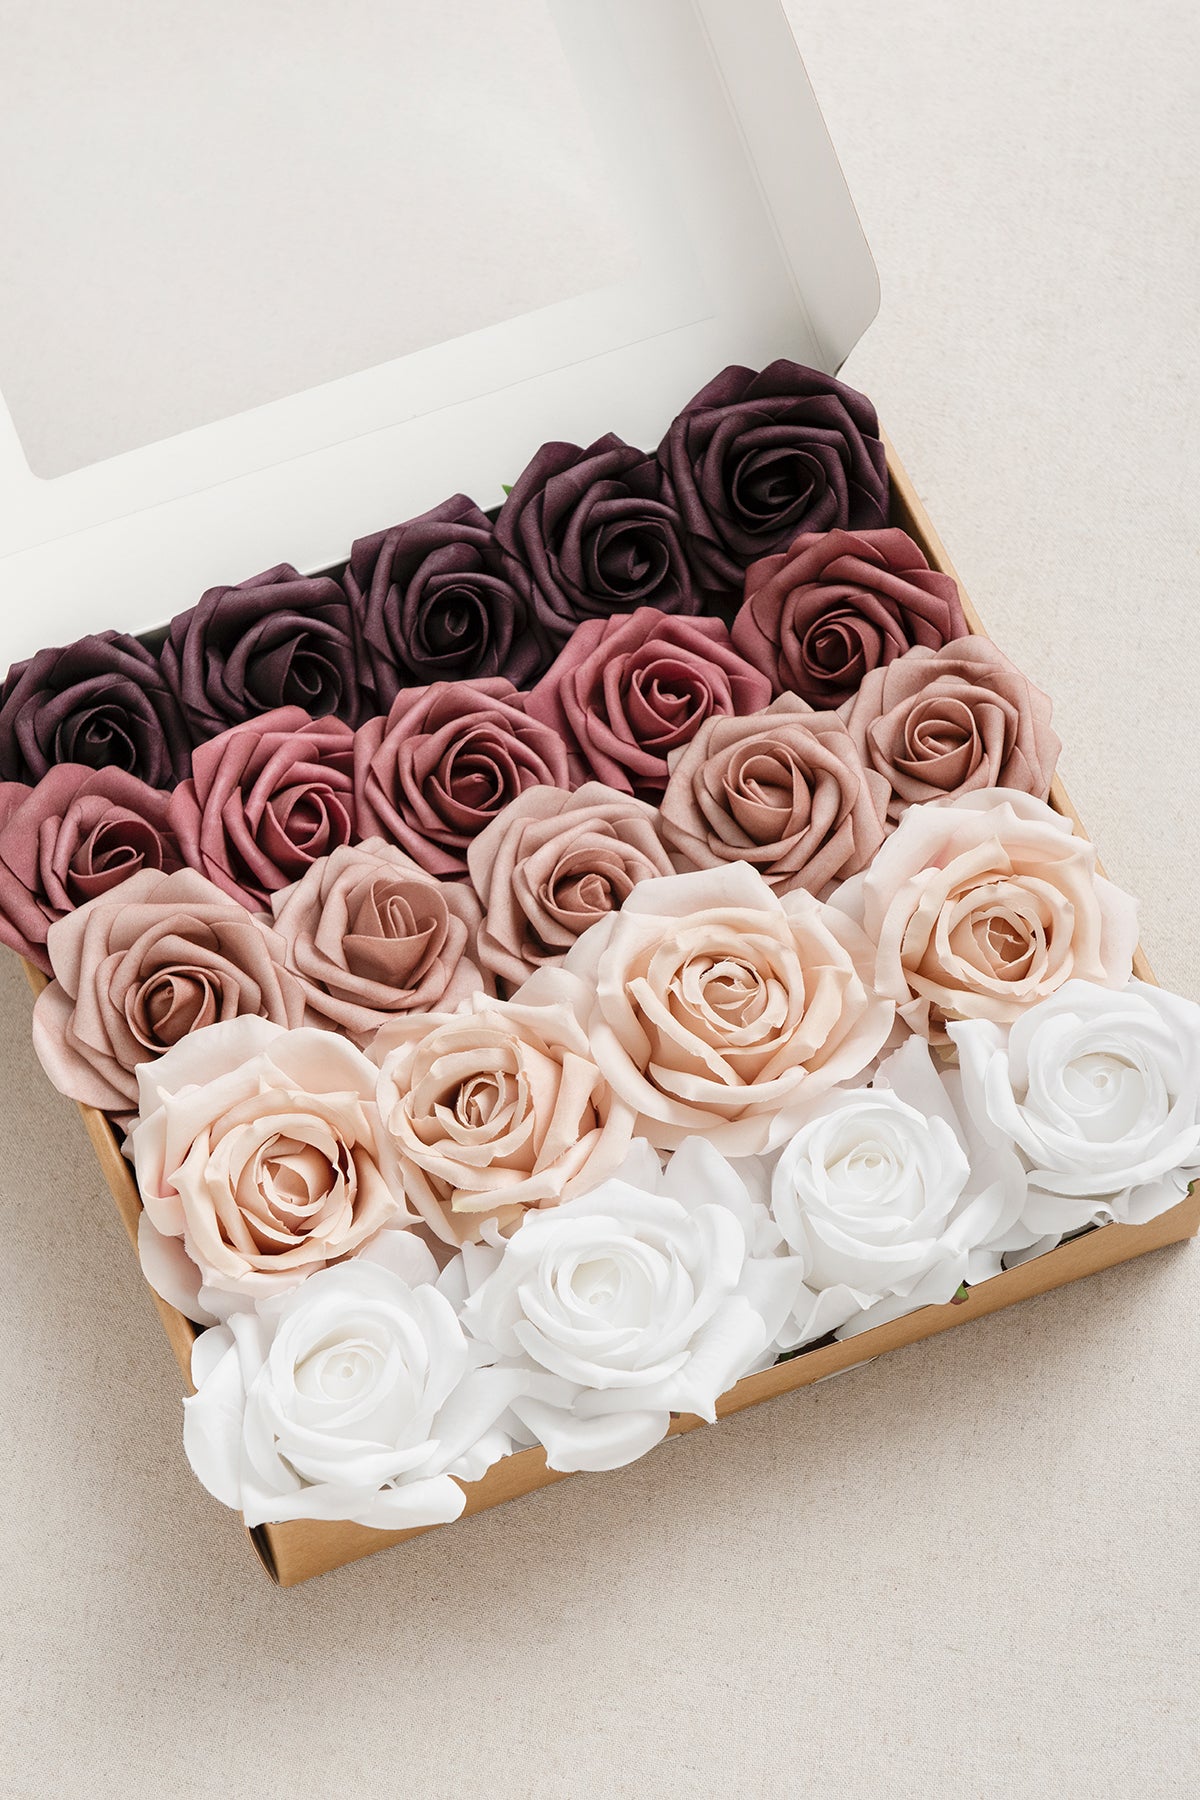 DIY Supporting Flower Boxes in Dusty Rose & Mauve